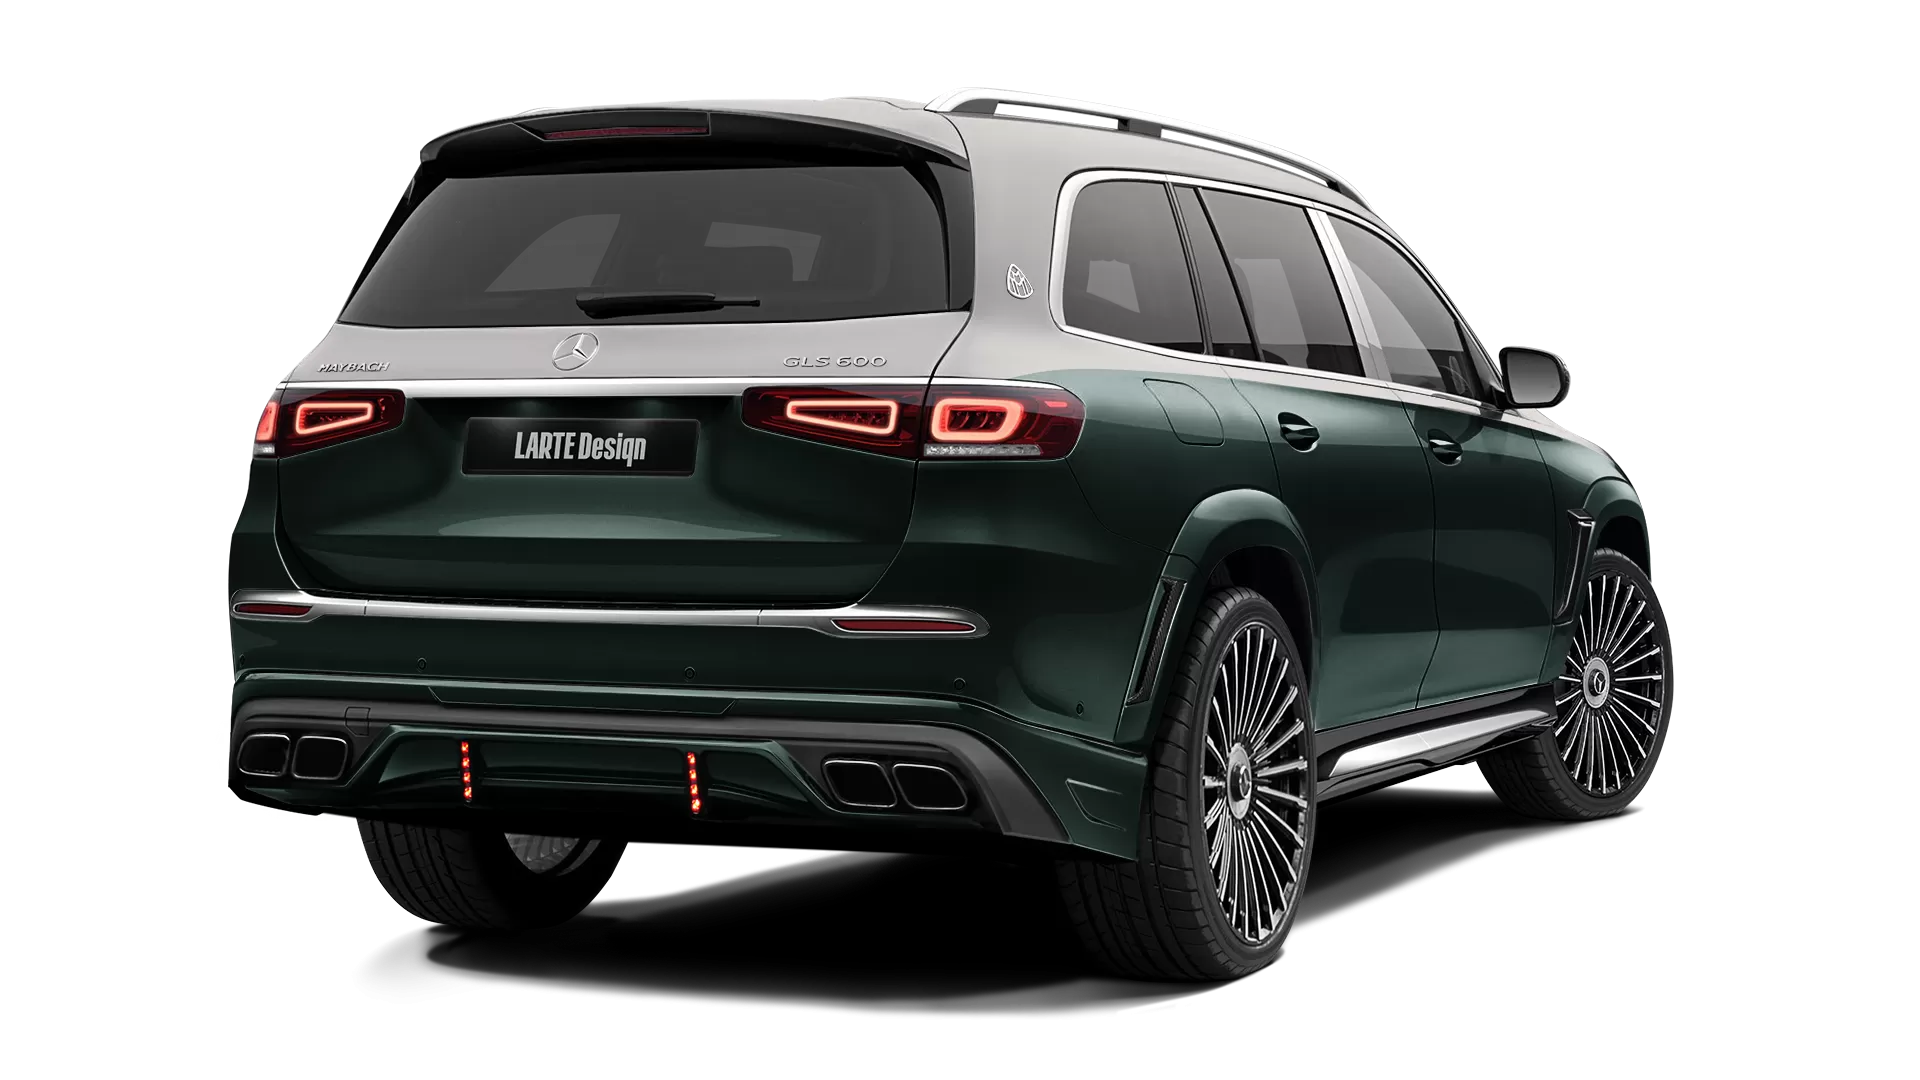 Mercedes Maybach GLS 600 with painted body kit: rear view shown in Emerald Green & Mojave Silver